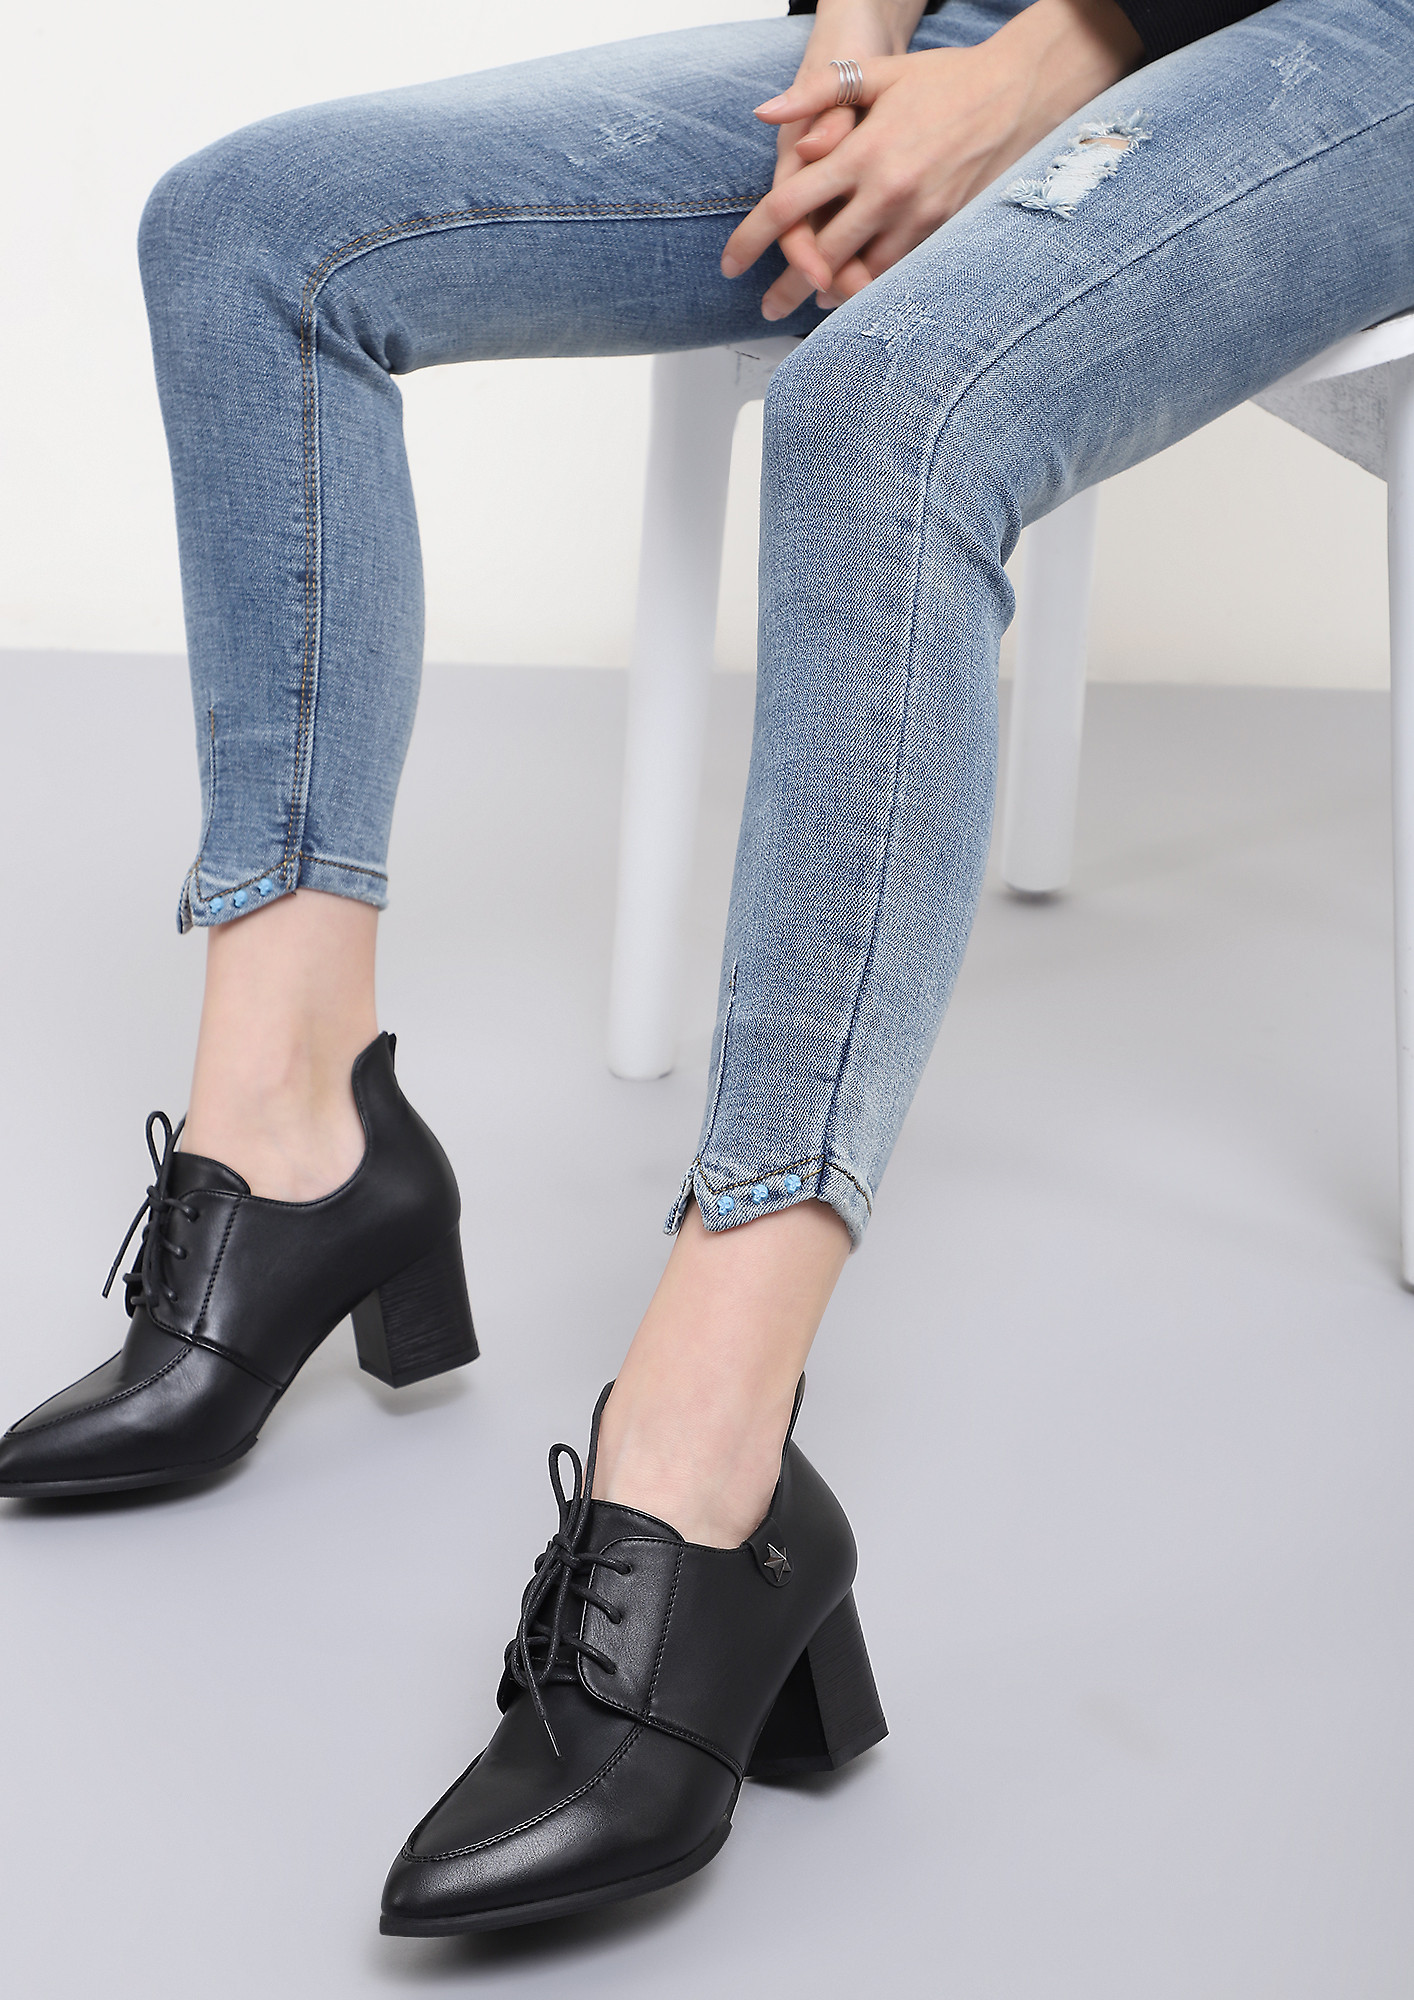 READY TO CLOCK-OUT BLACK HEELED SMART SHOES